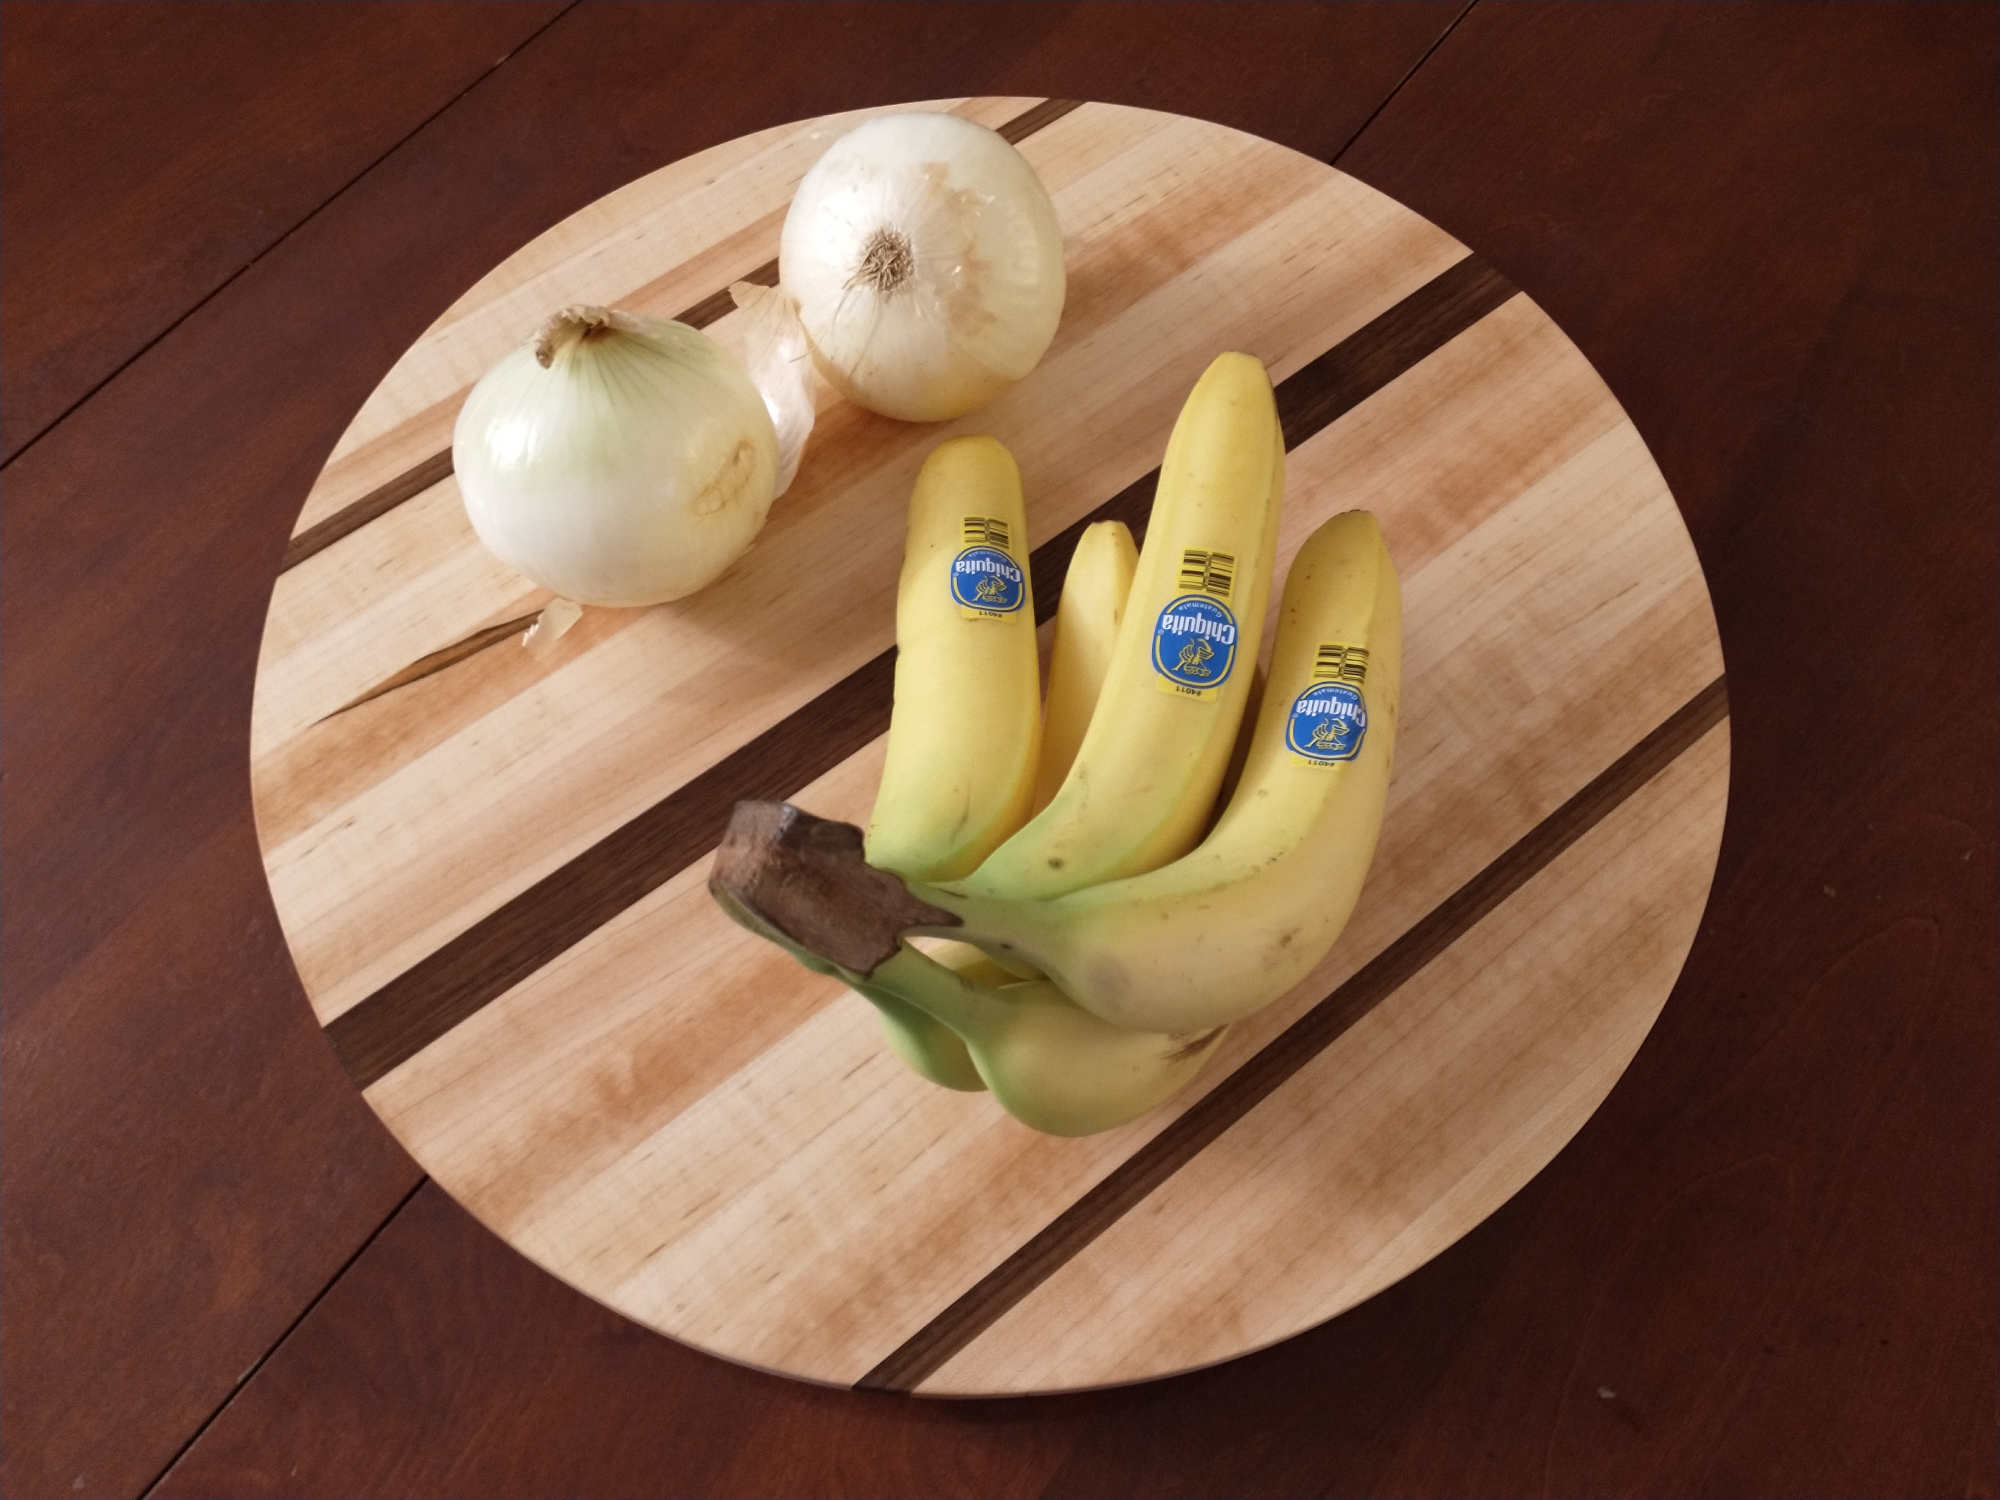 No need to pass the potatoes—spin them with this DIY Lazy Susan